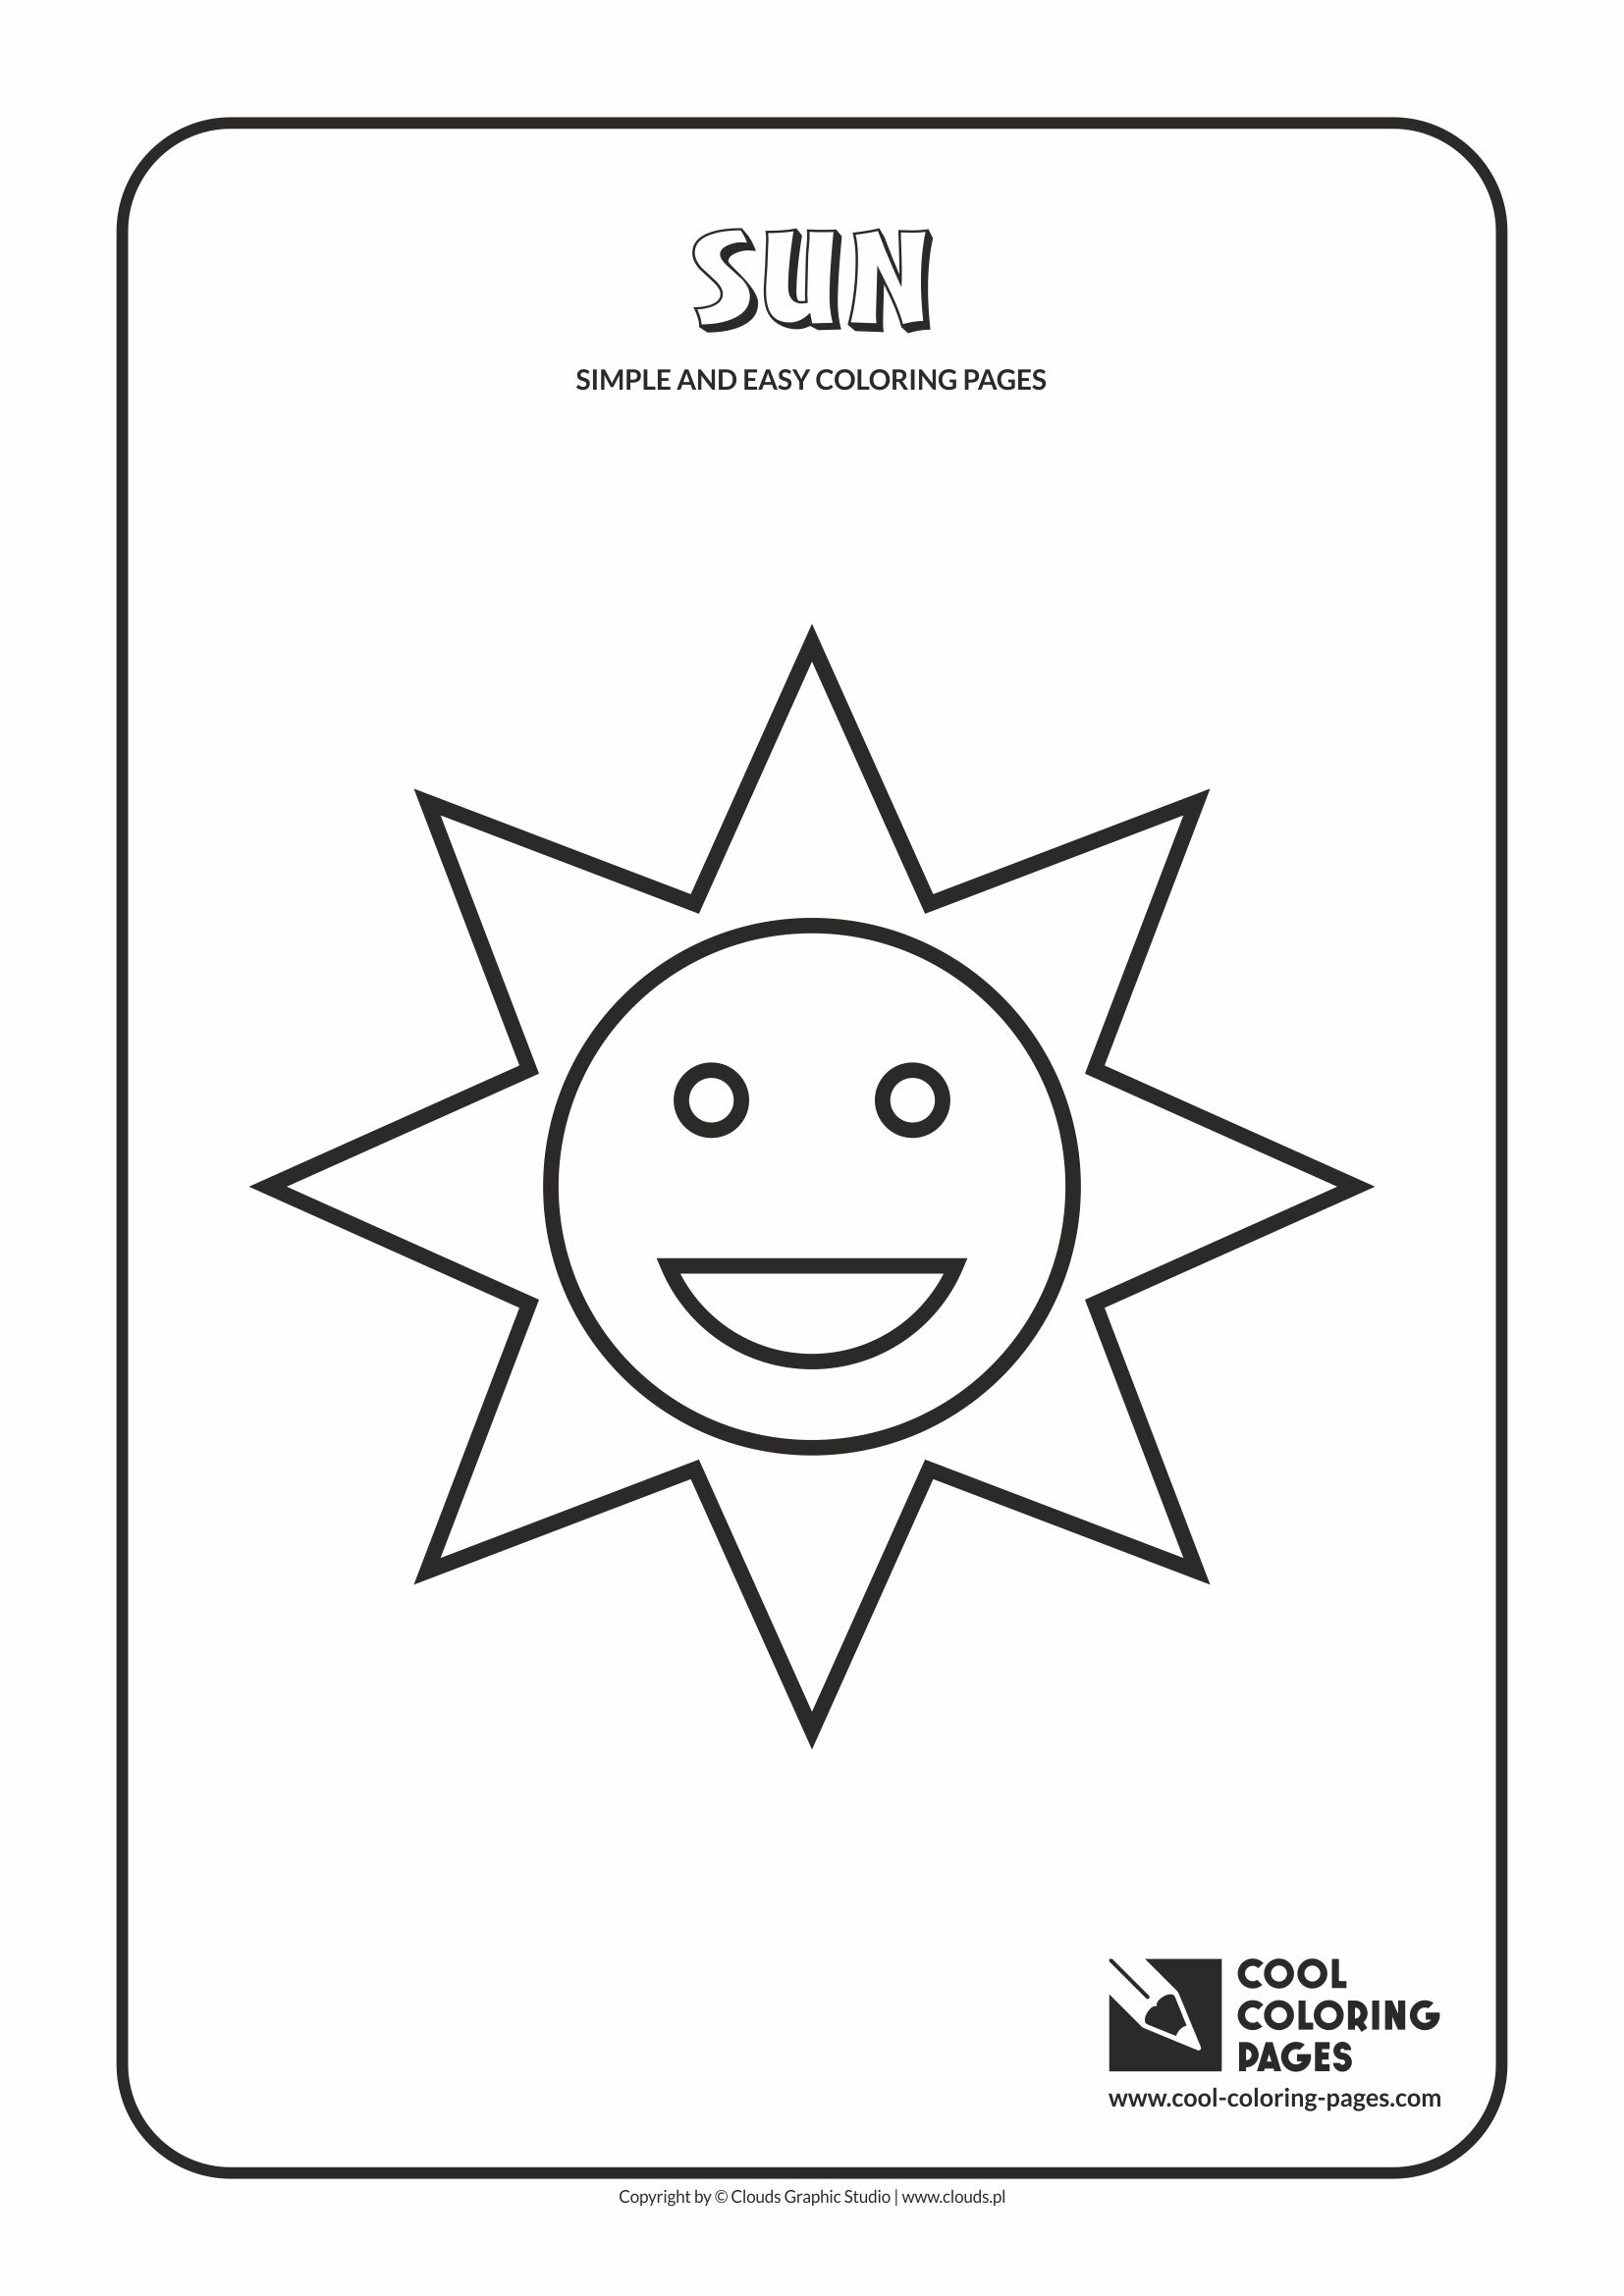 Simple and easy coloring pages for toddlers - Sun